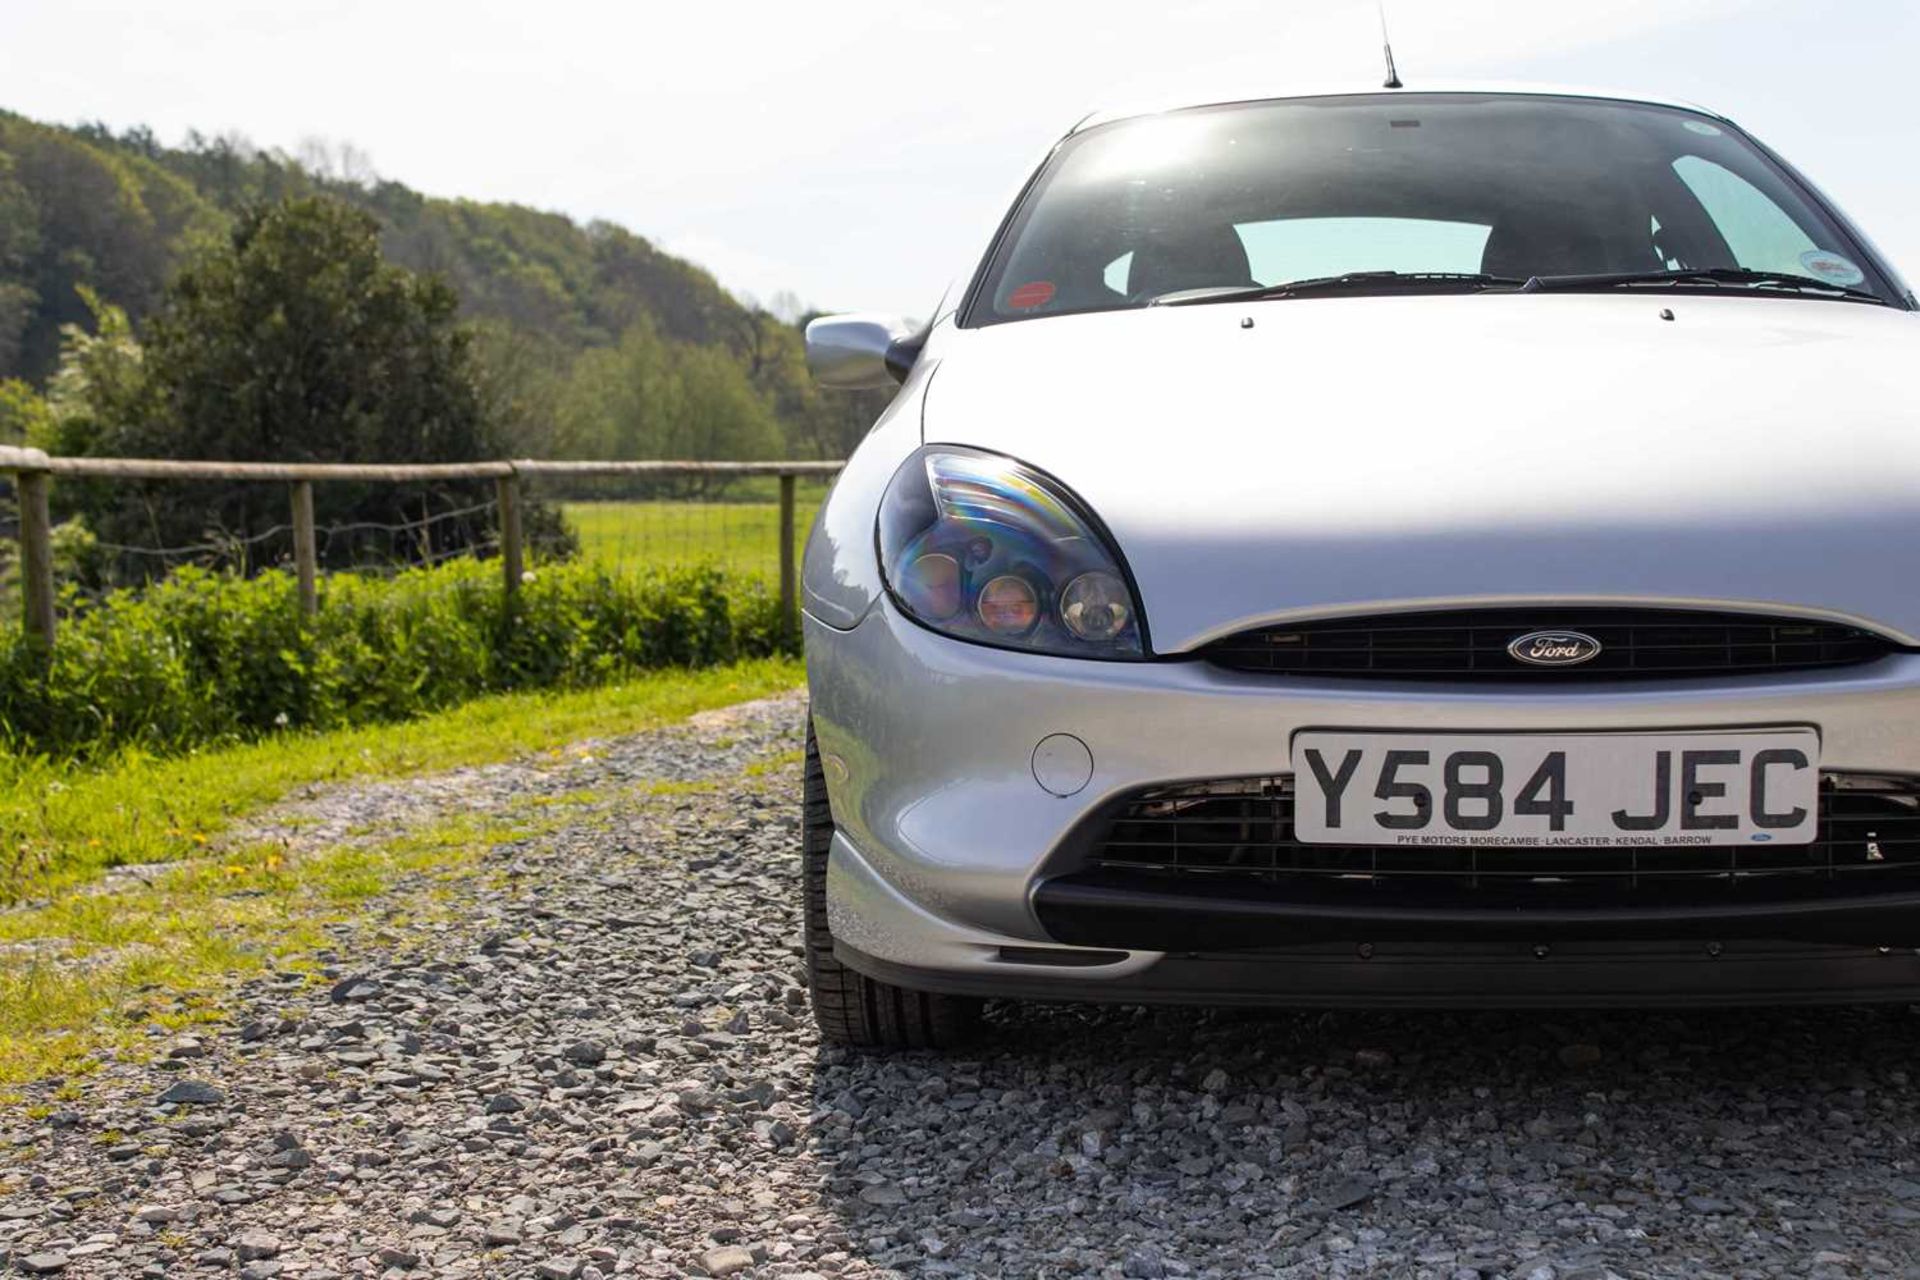 2001 Ford Puma Only 28,000 miles from new  - Image 35 of 99